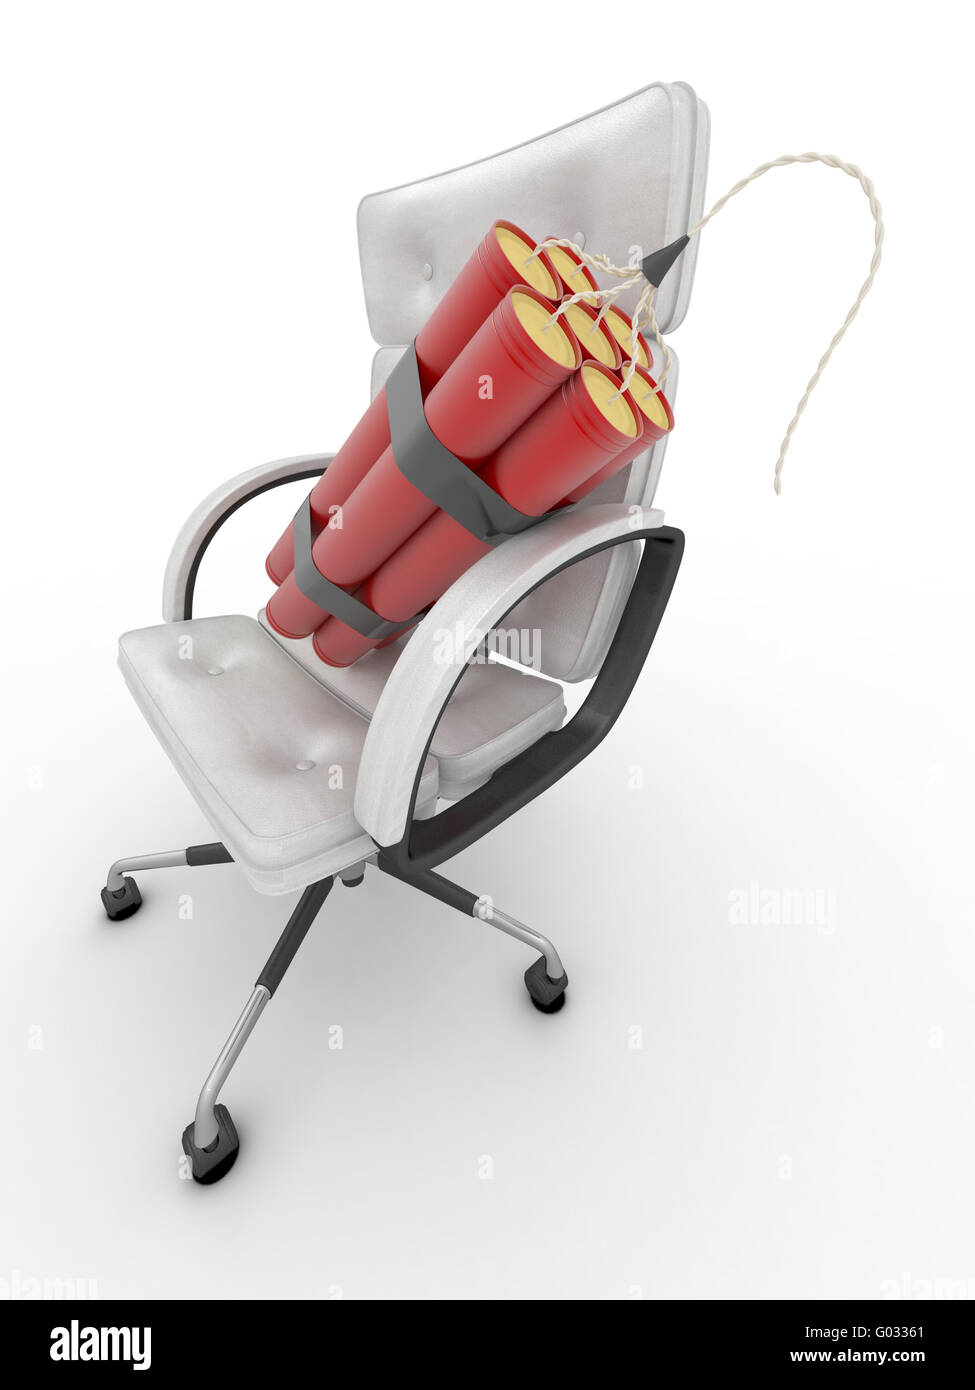 Dismissal of manager. Dynamit on office armchair Stock Photo